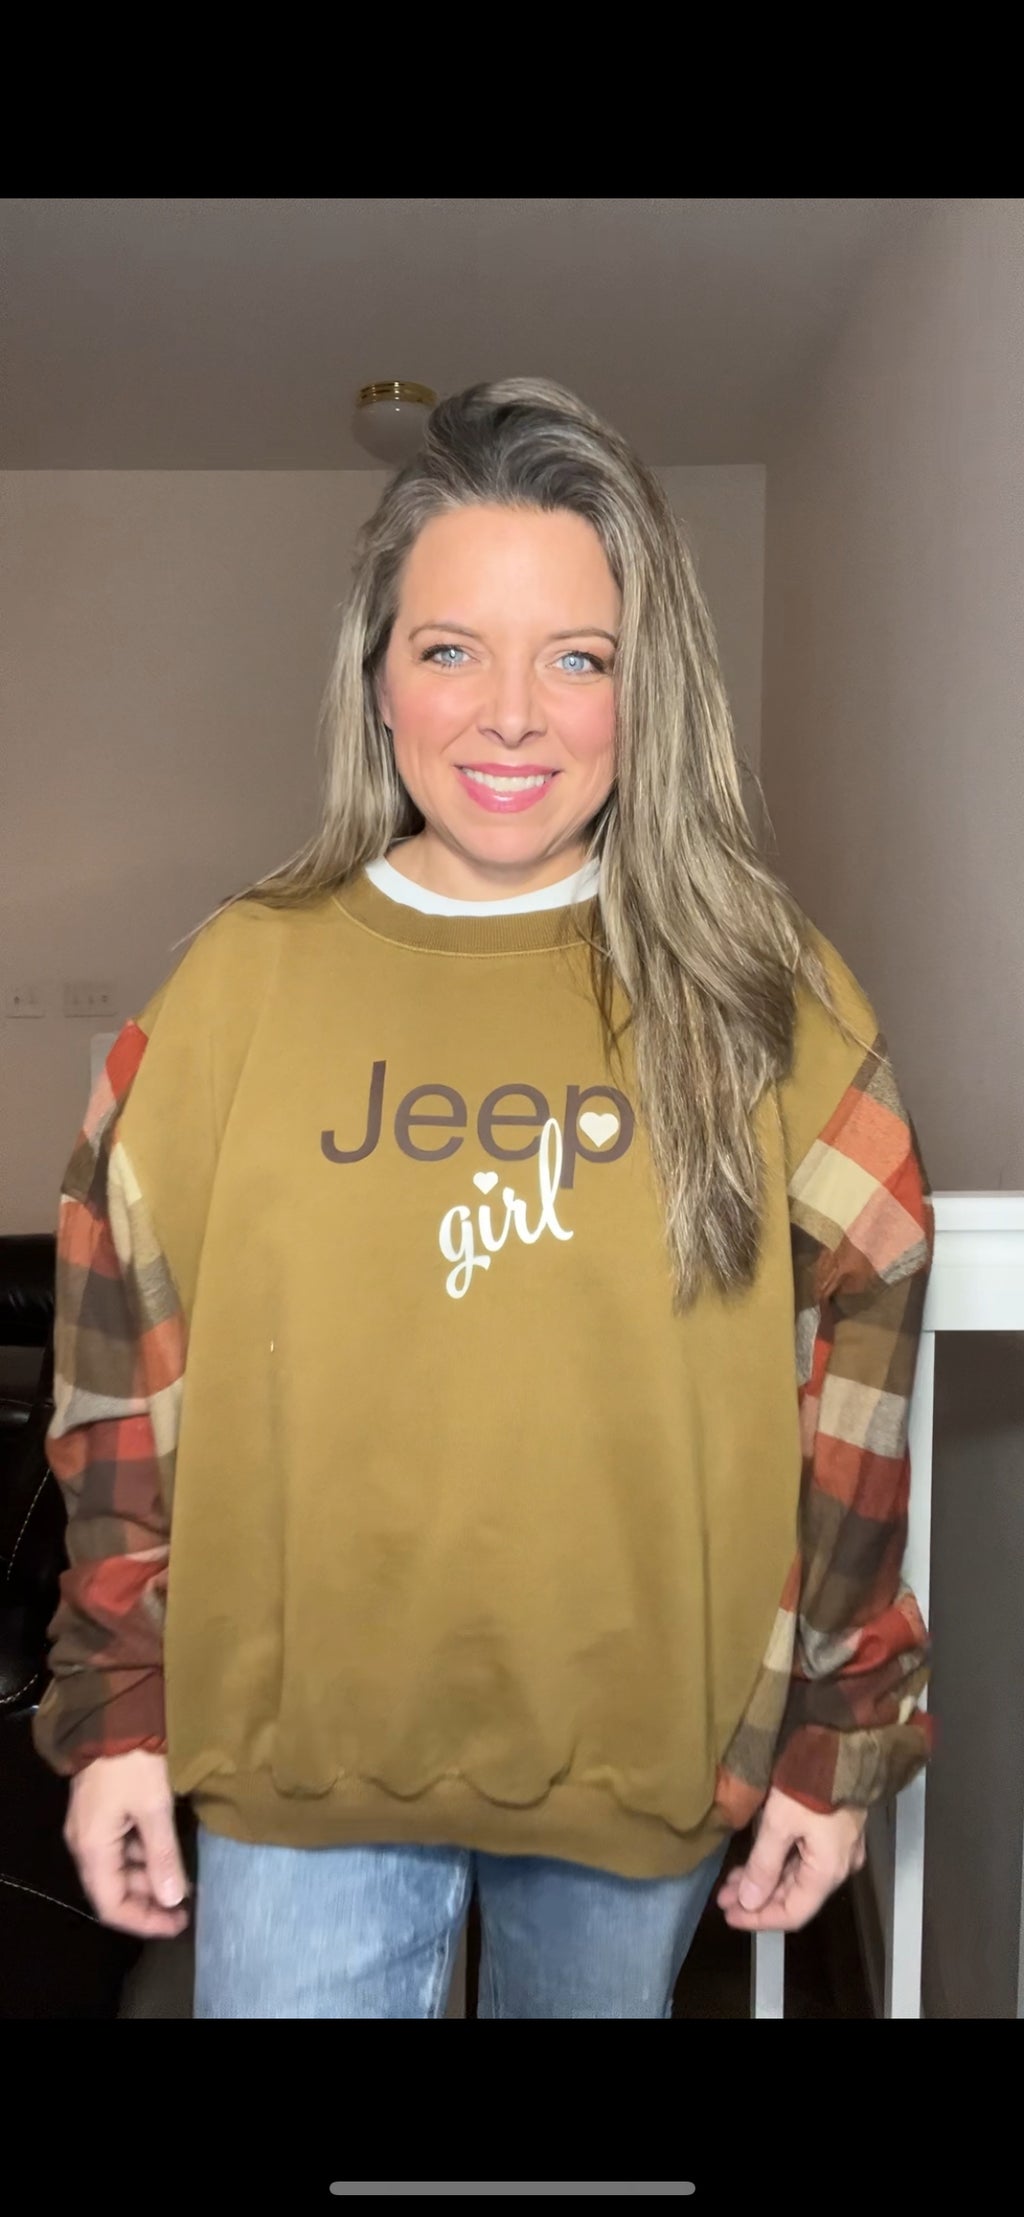 Jeep Girl – women’s XL – thick sweatshirt with flannel sleeves ￼